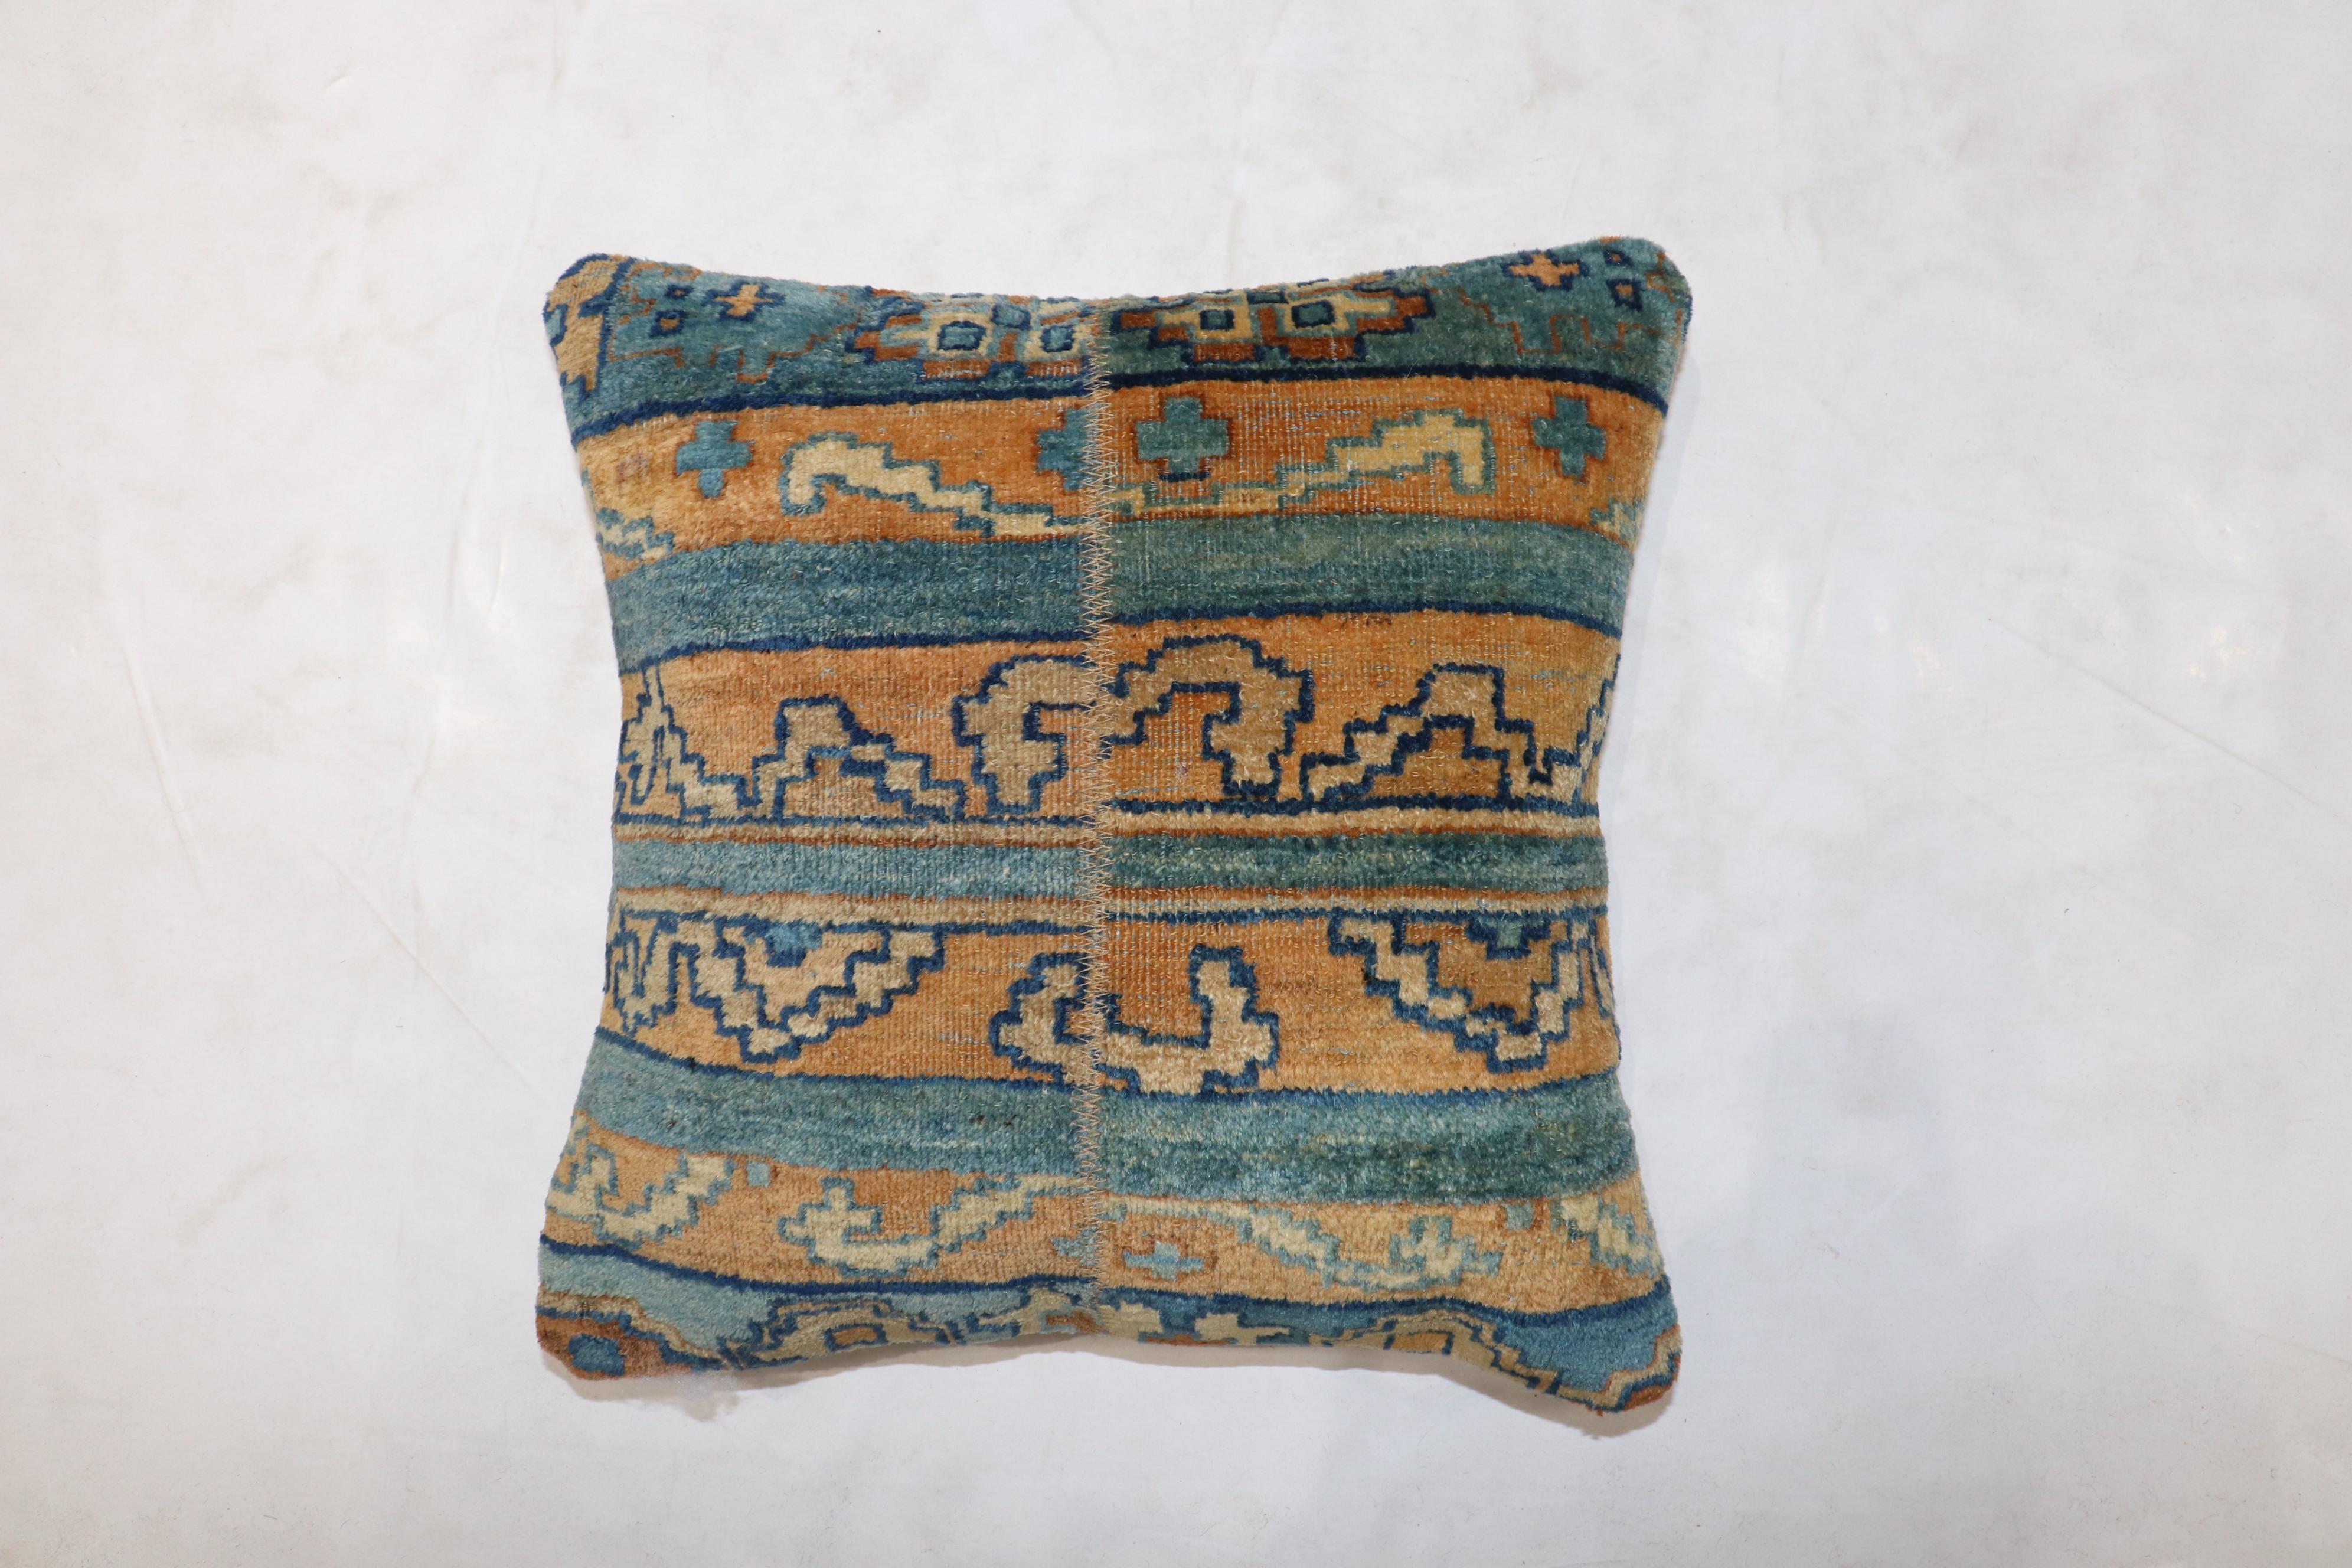 Pillow made from an antique Indian Agra rug zipper closure and polyfill insert provided

Measures 15'' x 15''.